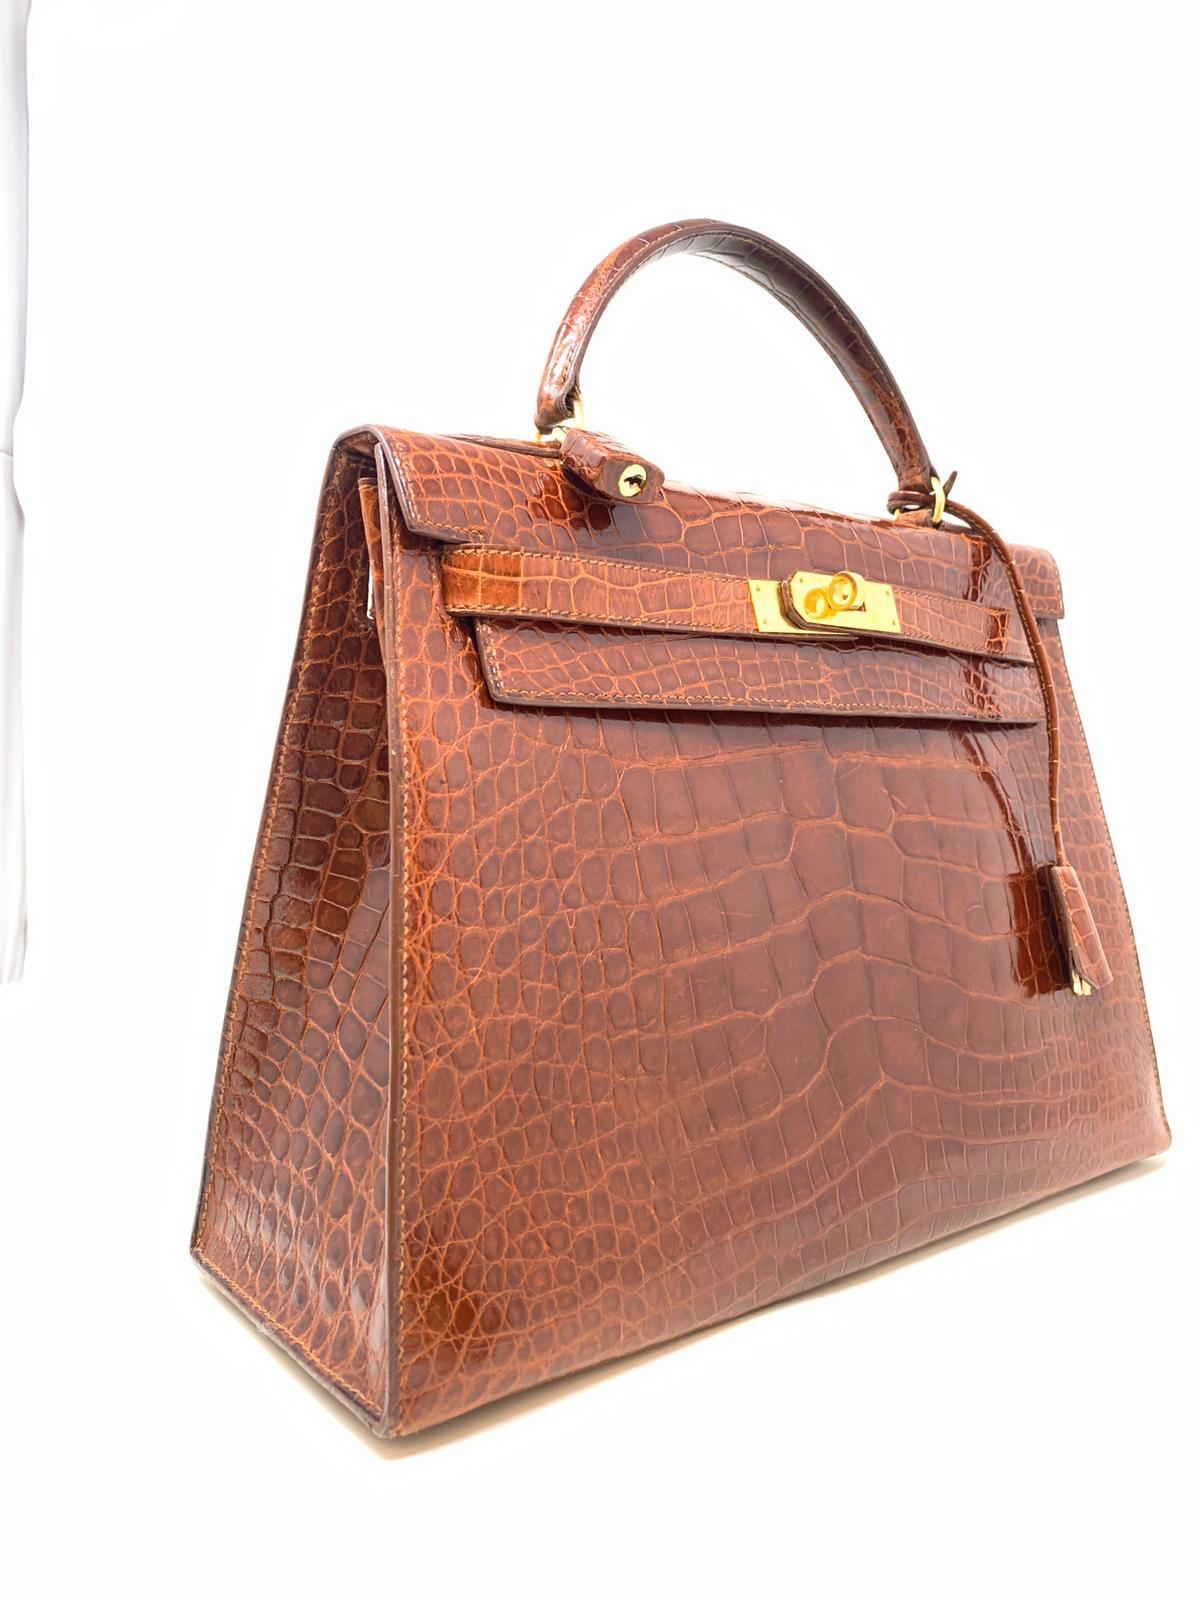 Hermes iconic bag, is in good condition with small signs of wear inside suede pocket and zip pocket : Sac Kelly 32 Sellier shiny alligator miel color. 
Year of production 1992
Hdw Gold
Good condition complete with shoulder strap.